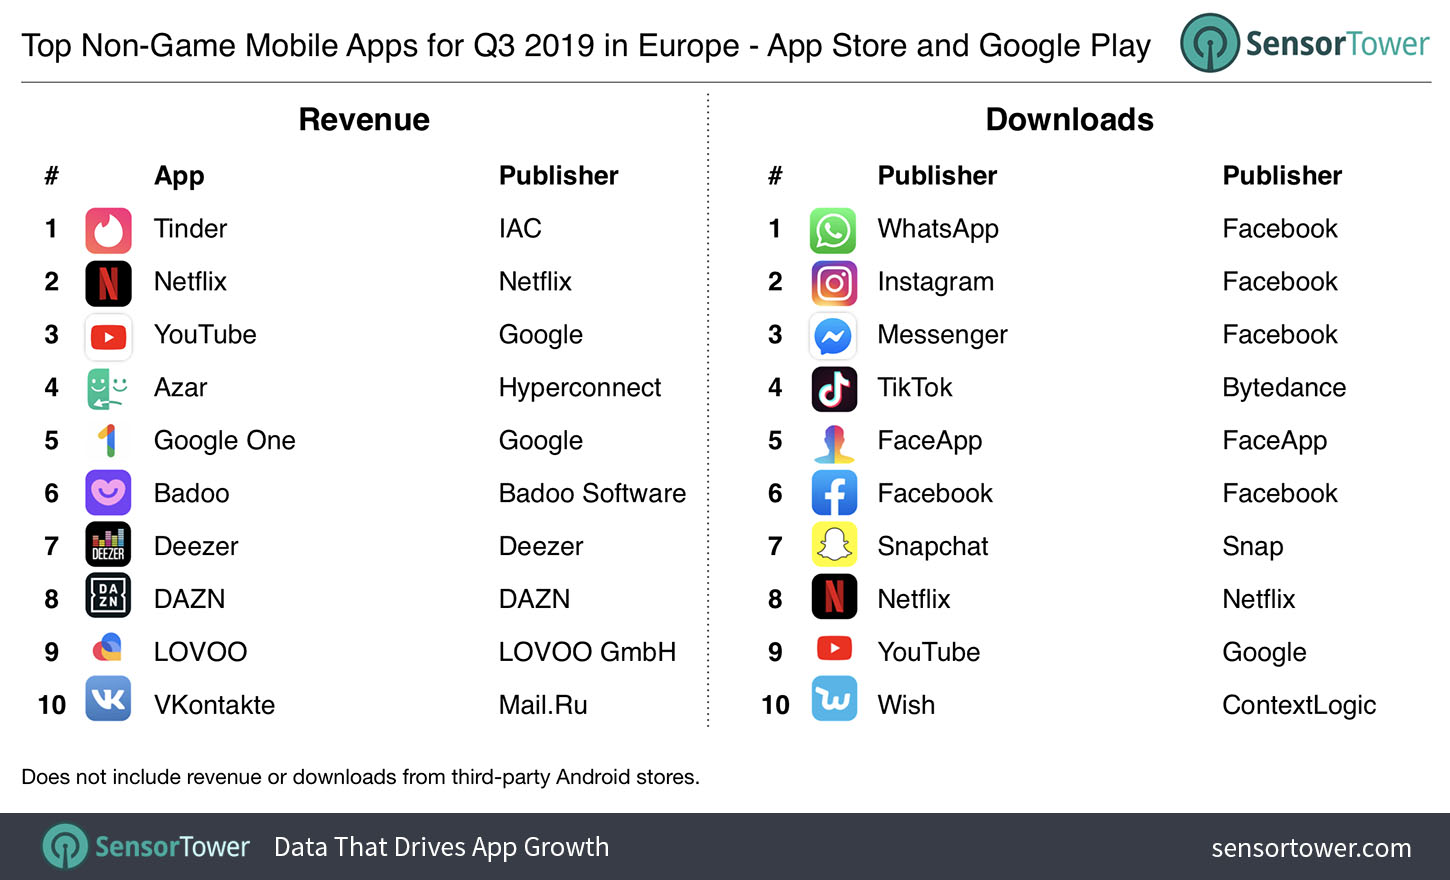 Q3 2019 Top Mobile Apps for Europe